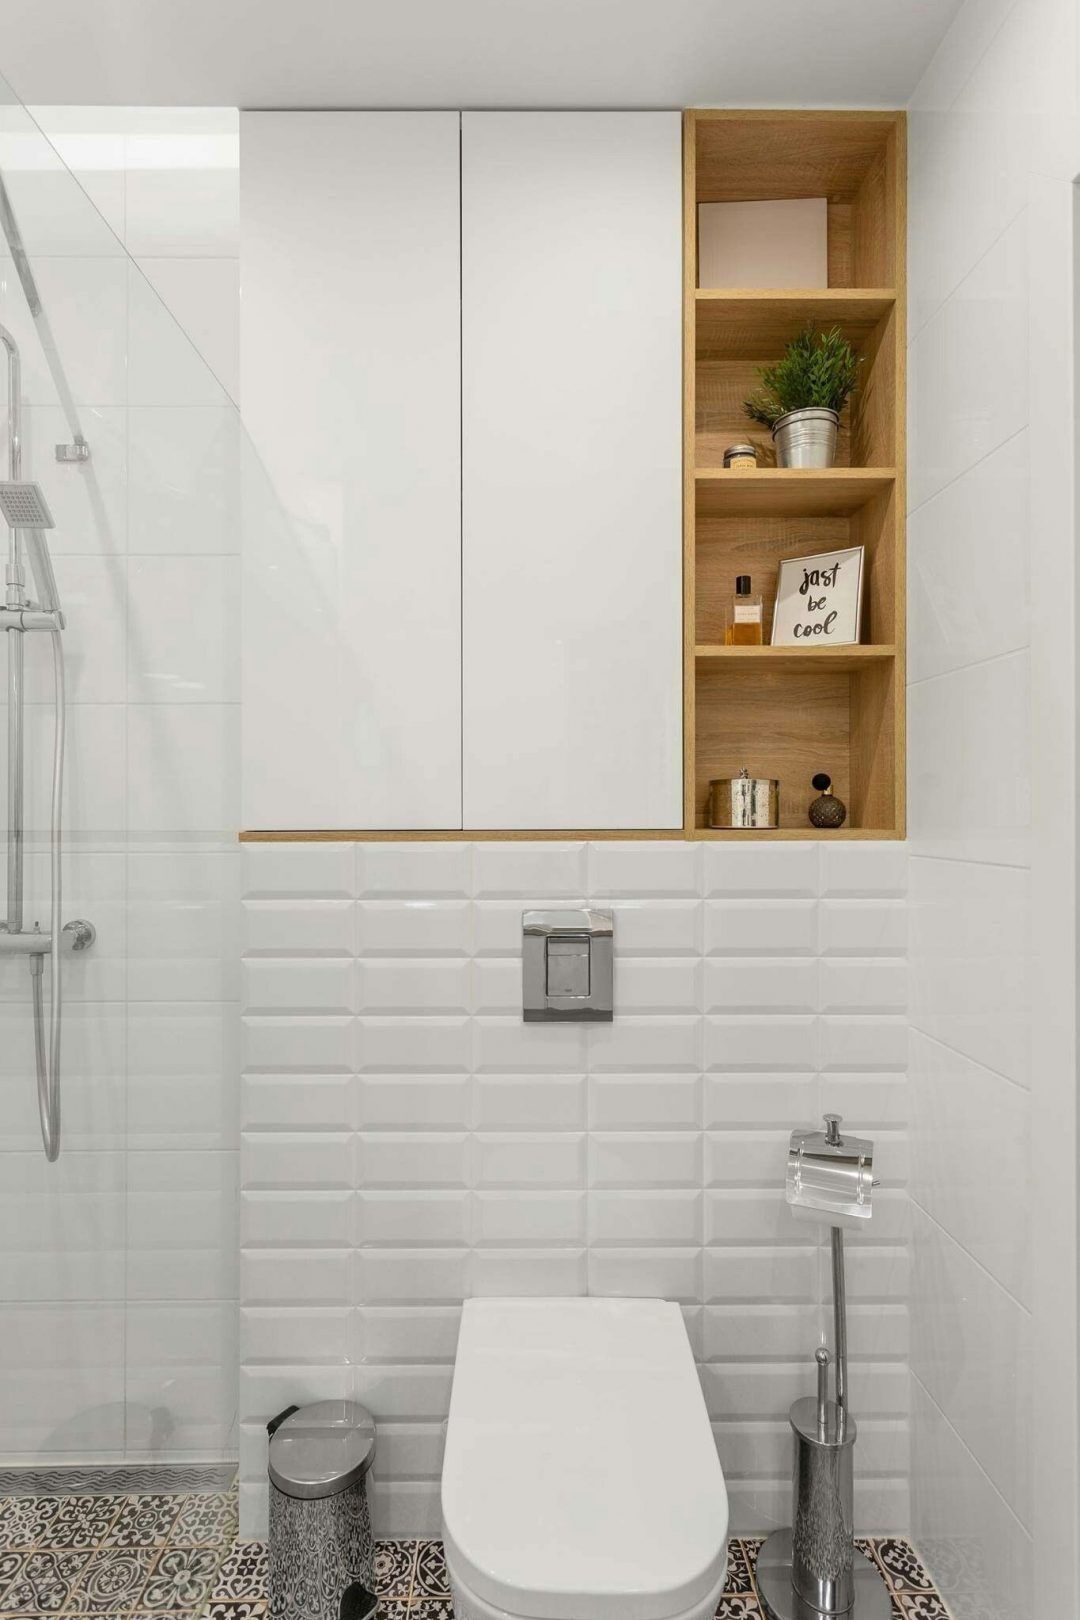 25 Tranquil Scandinavian Bathroom Decor To Get Rid Of Daily Stress - N18